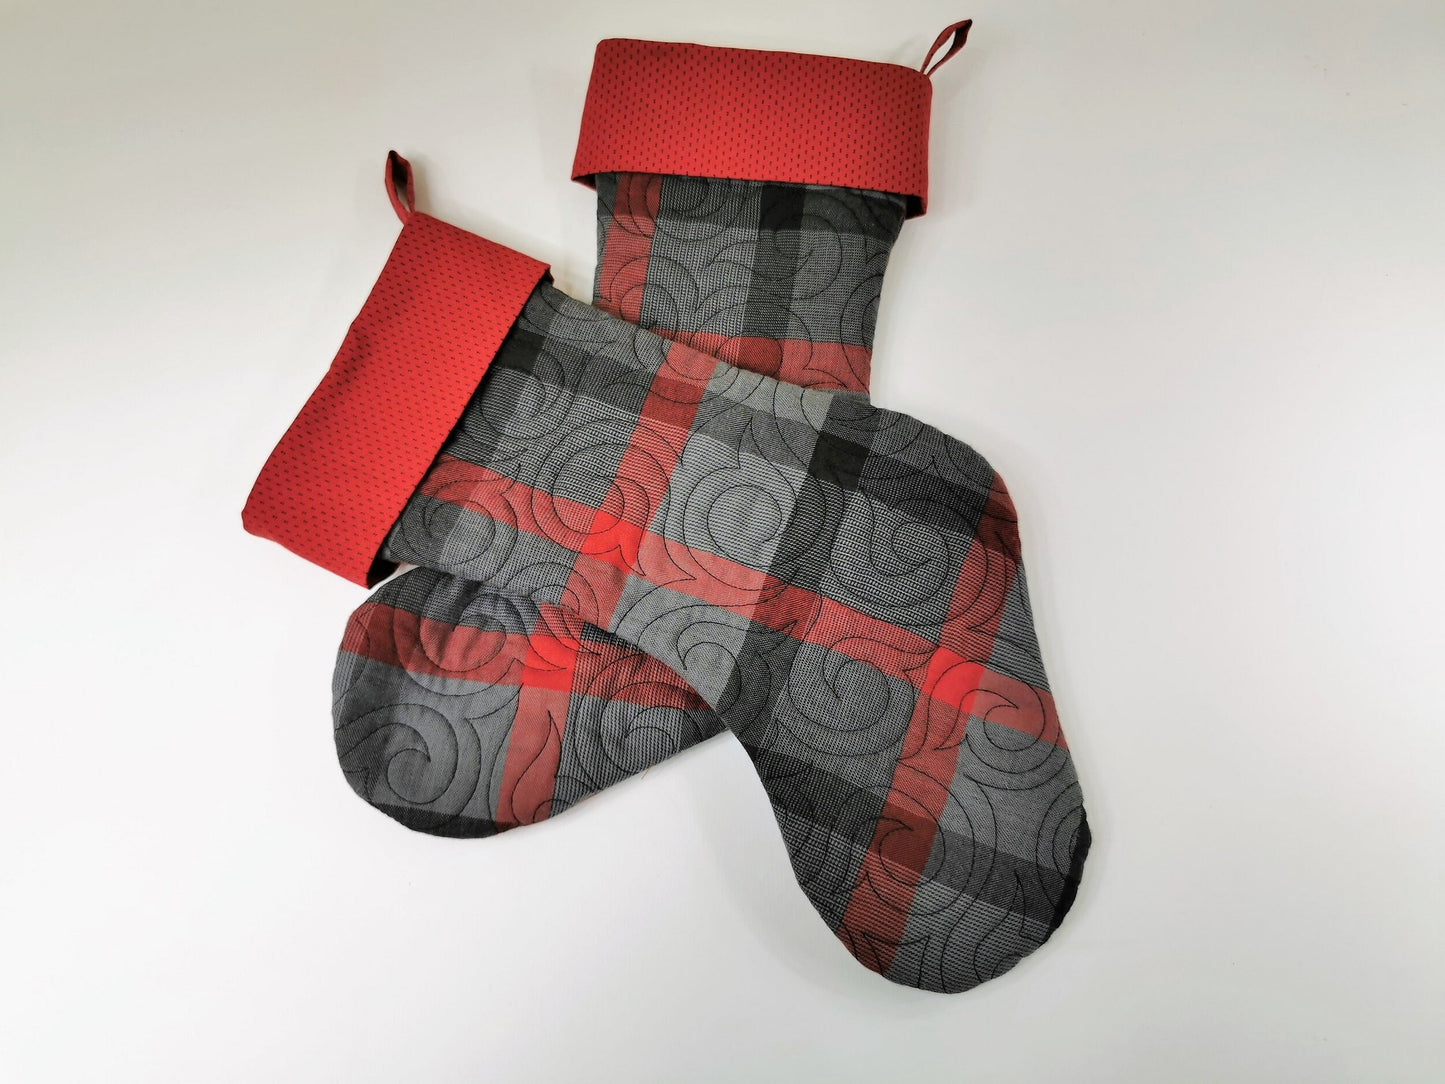 showing two matching christmas stockings that are available